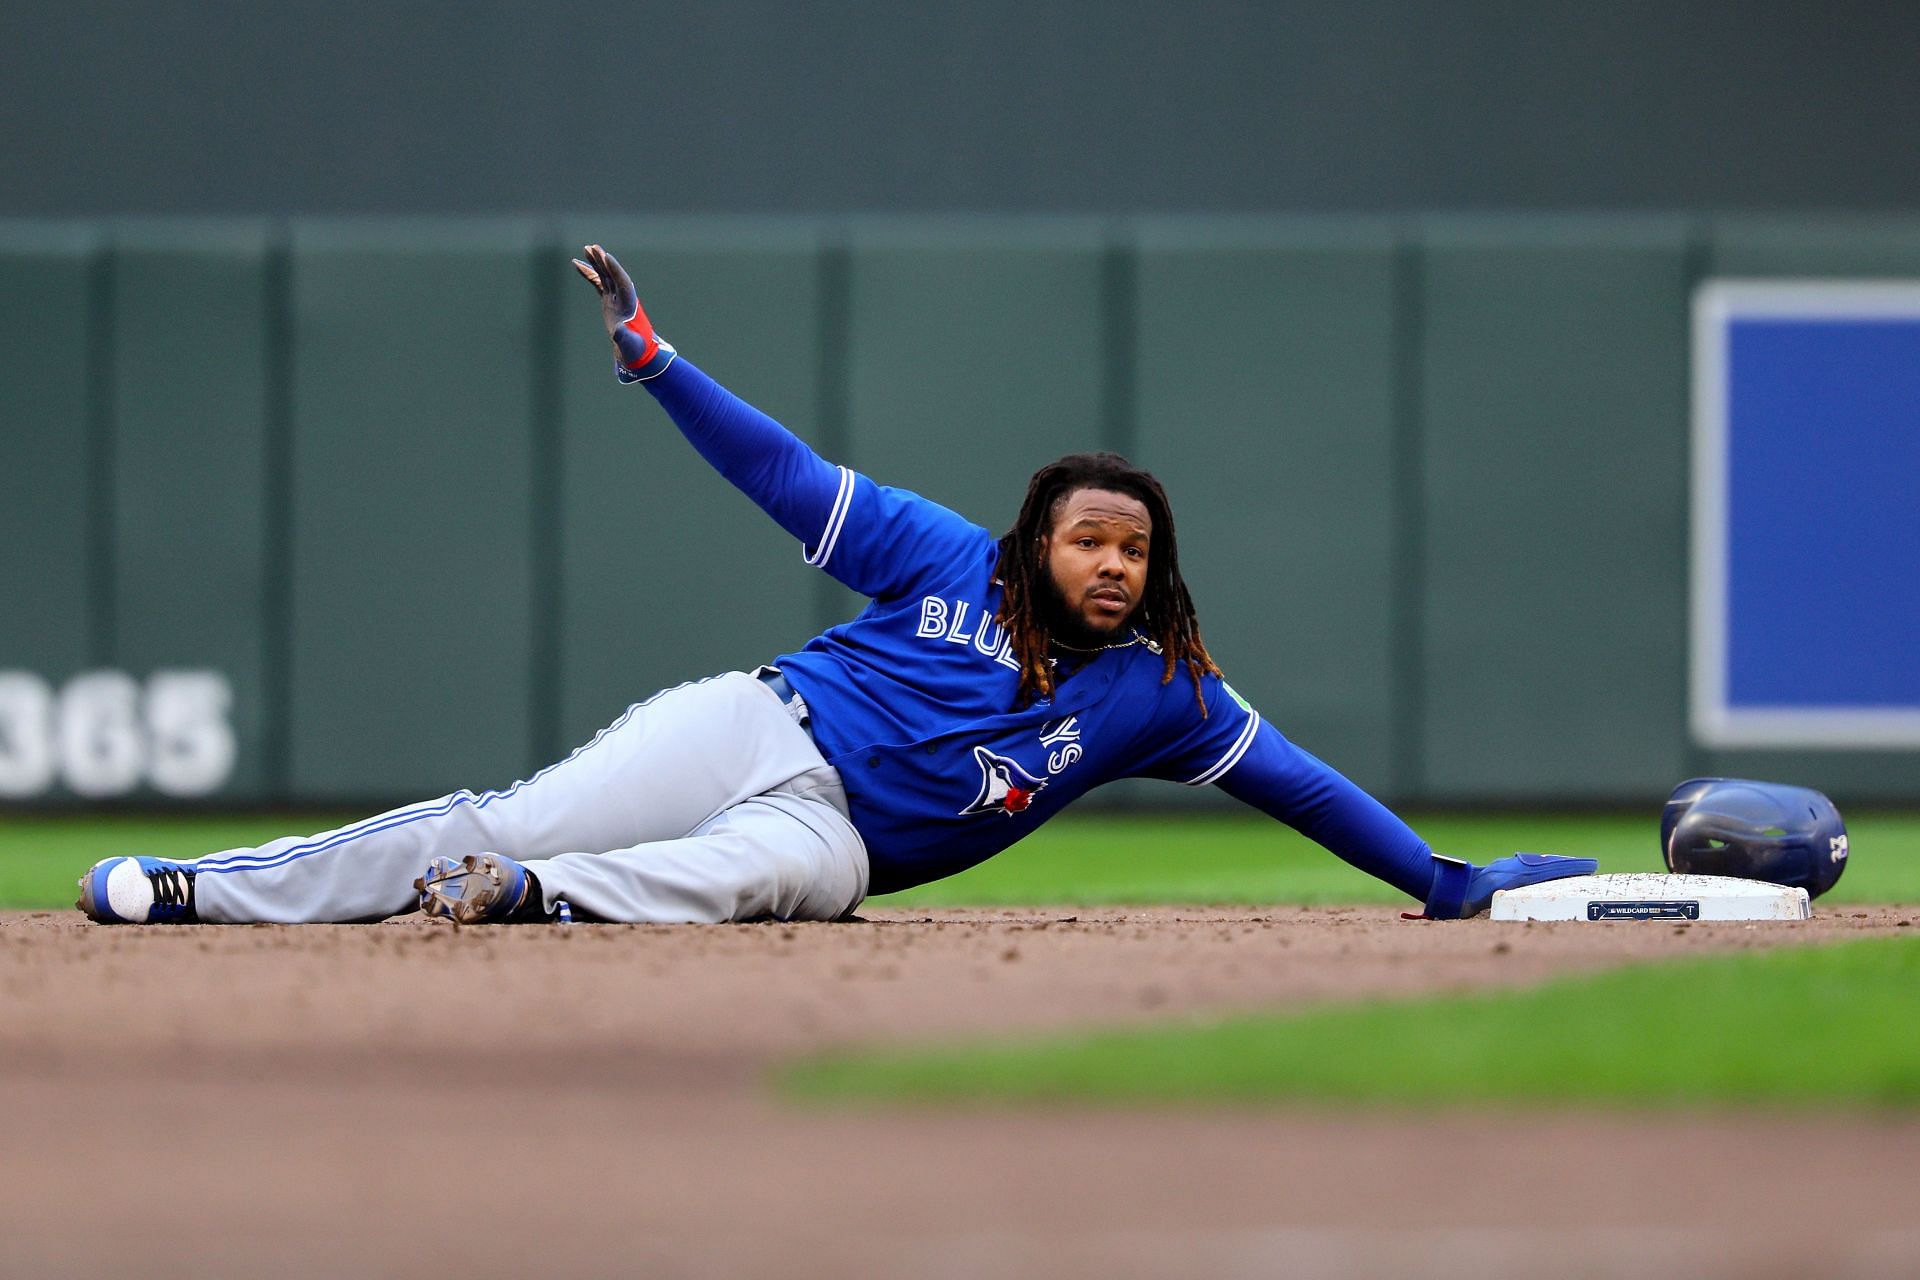 Can Vladimir Guerrero Jr. lead the Jays to the promised land?